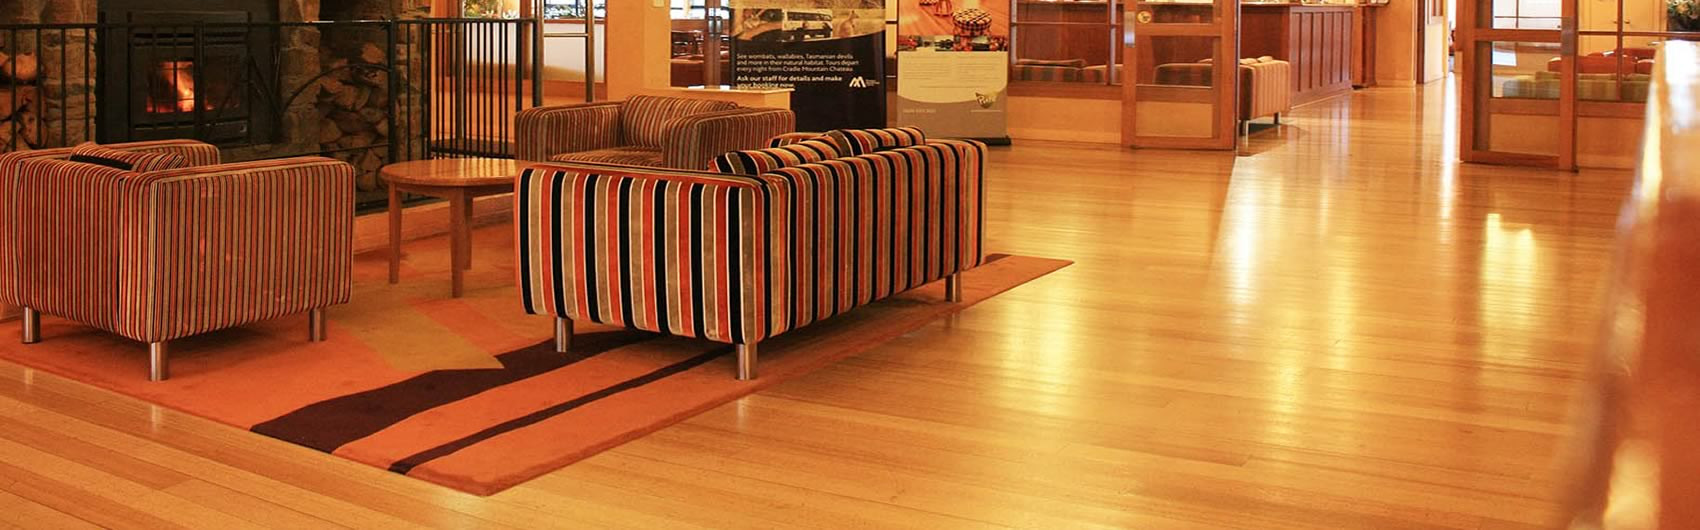 21 Ideal Stanley Steemer Hardwood Floor Cleaning Cost 2024 free download stanley steemer hardwood floor cleaning cost of summit county carpet cleaning upholstery high country with regard to welcome to high country cleaning